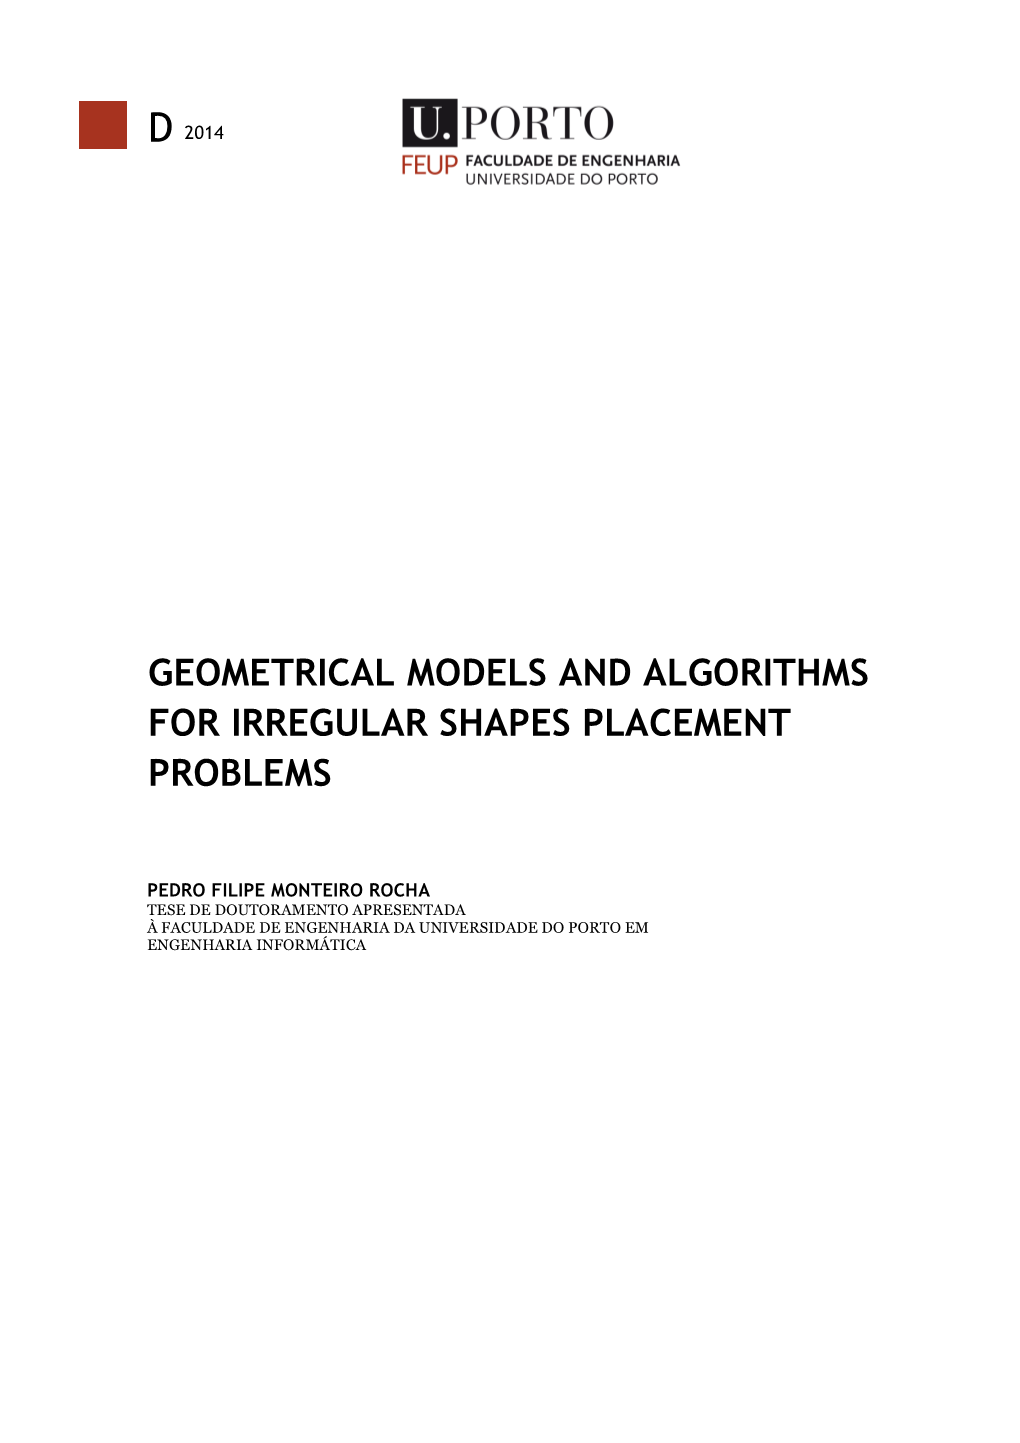 Geometrical Models and Algorithms for Irregular Shapes Placement Problems